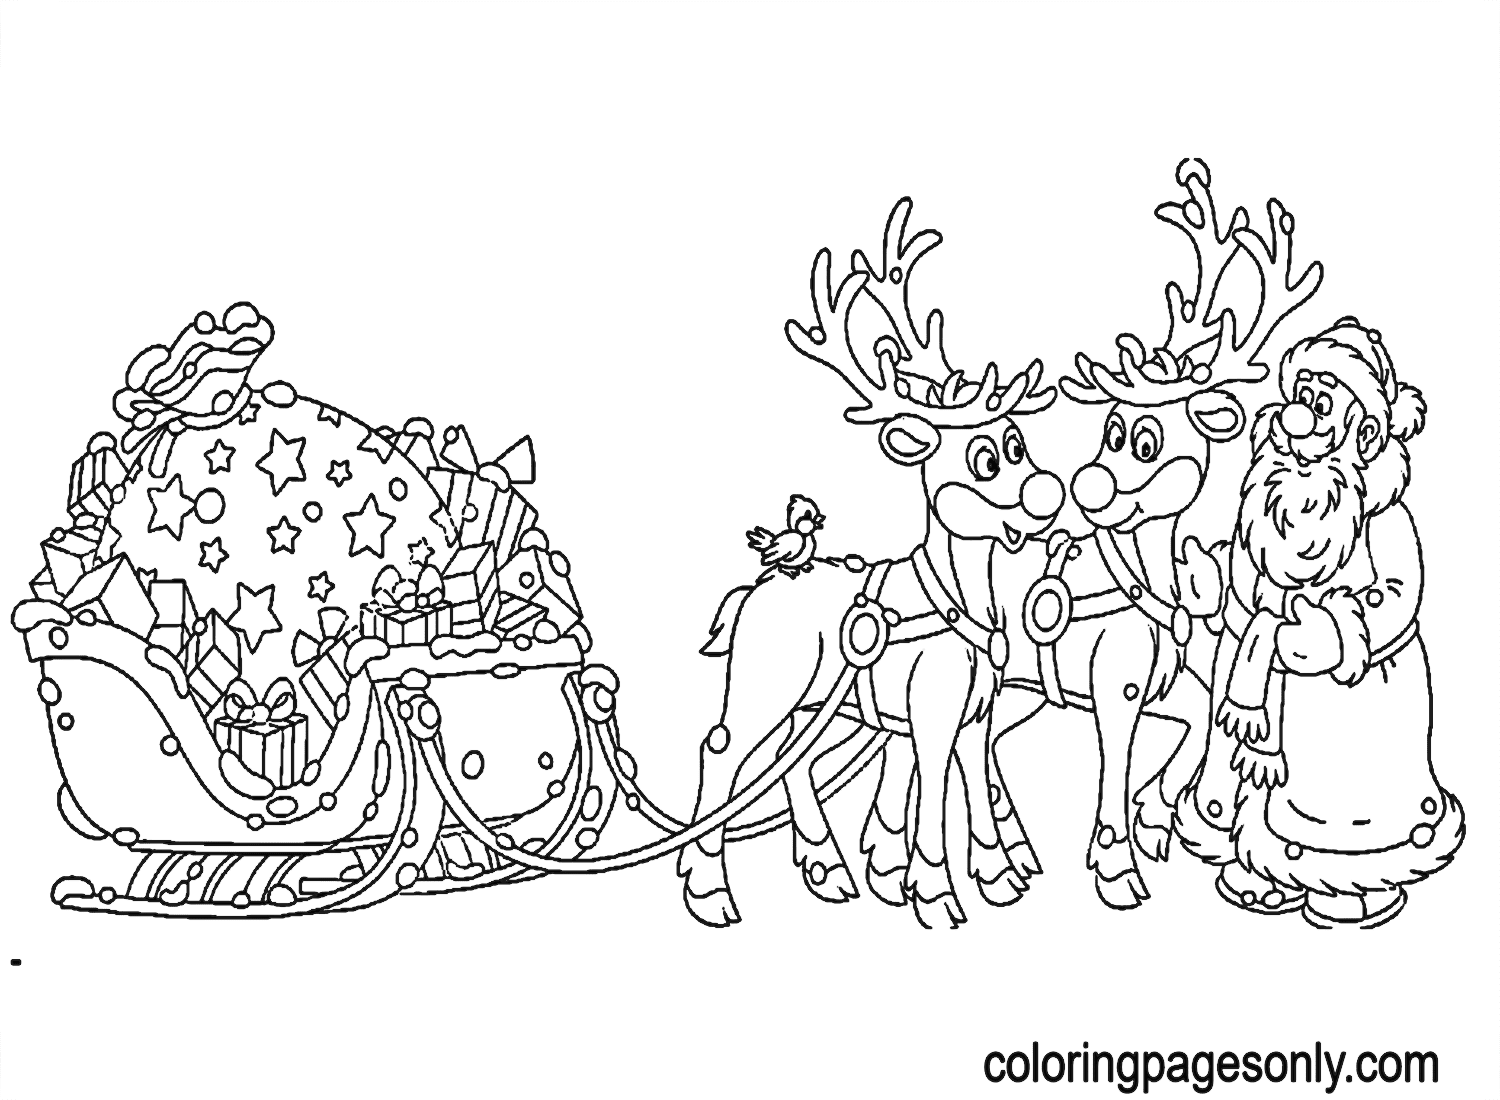 Santa Claus with Reindeer, Sleigh and Big Bag Of Gifts Coloring Page ...